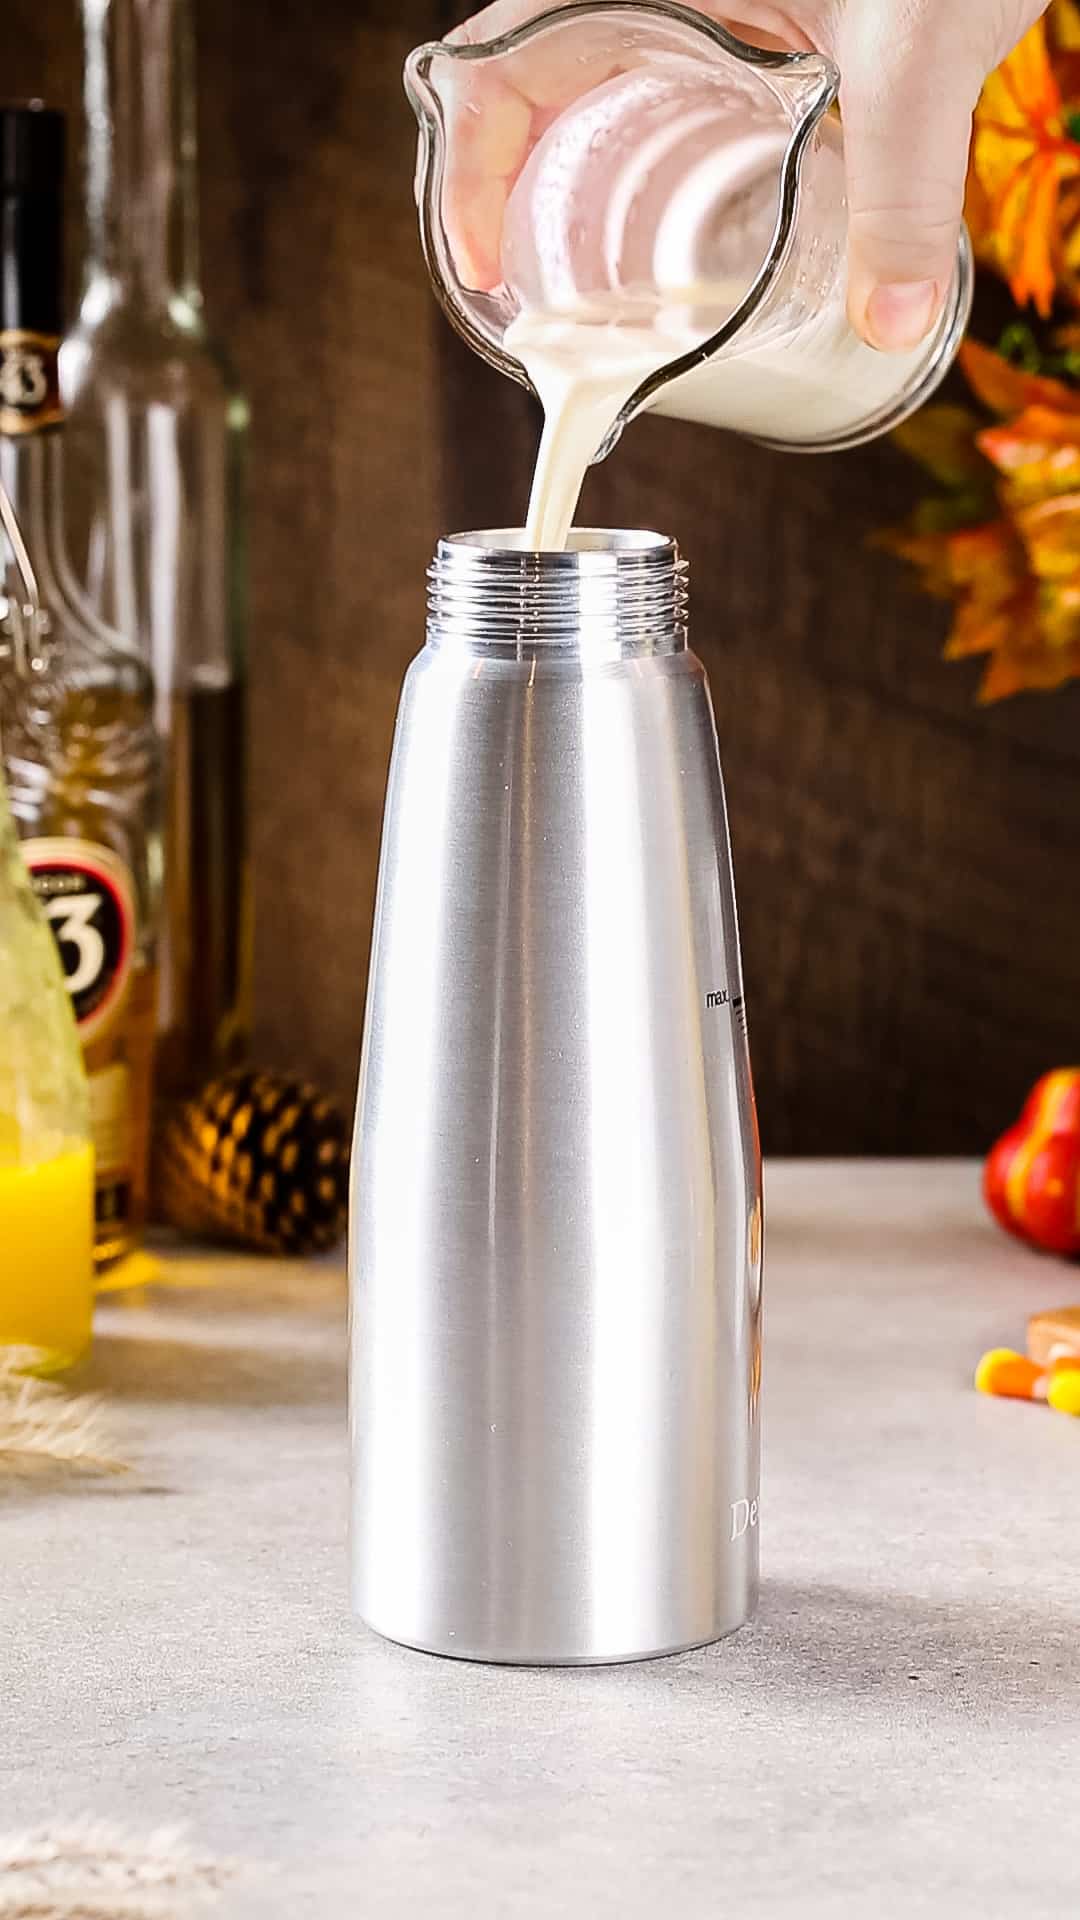 Hand pouring cream from a glass cup into a silver whipped cream dispenser.